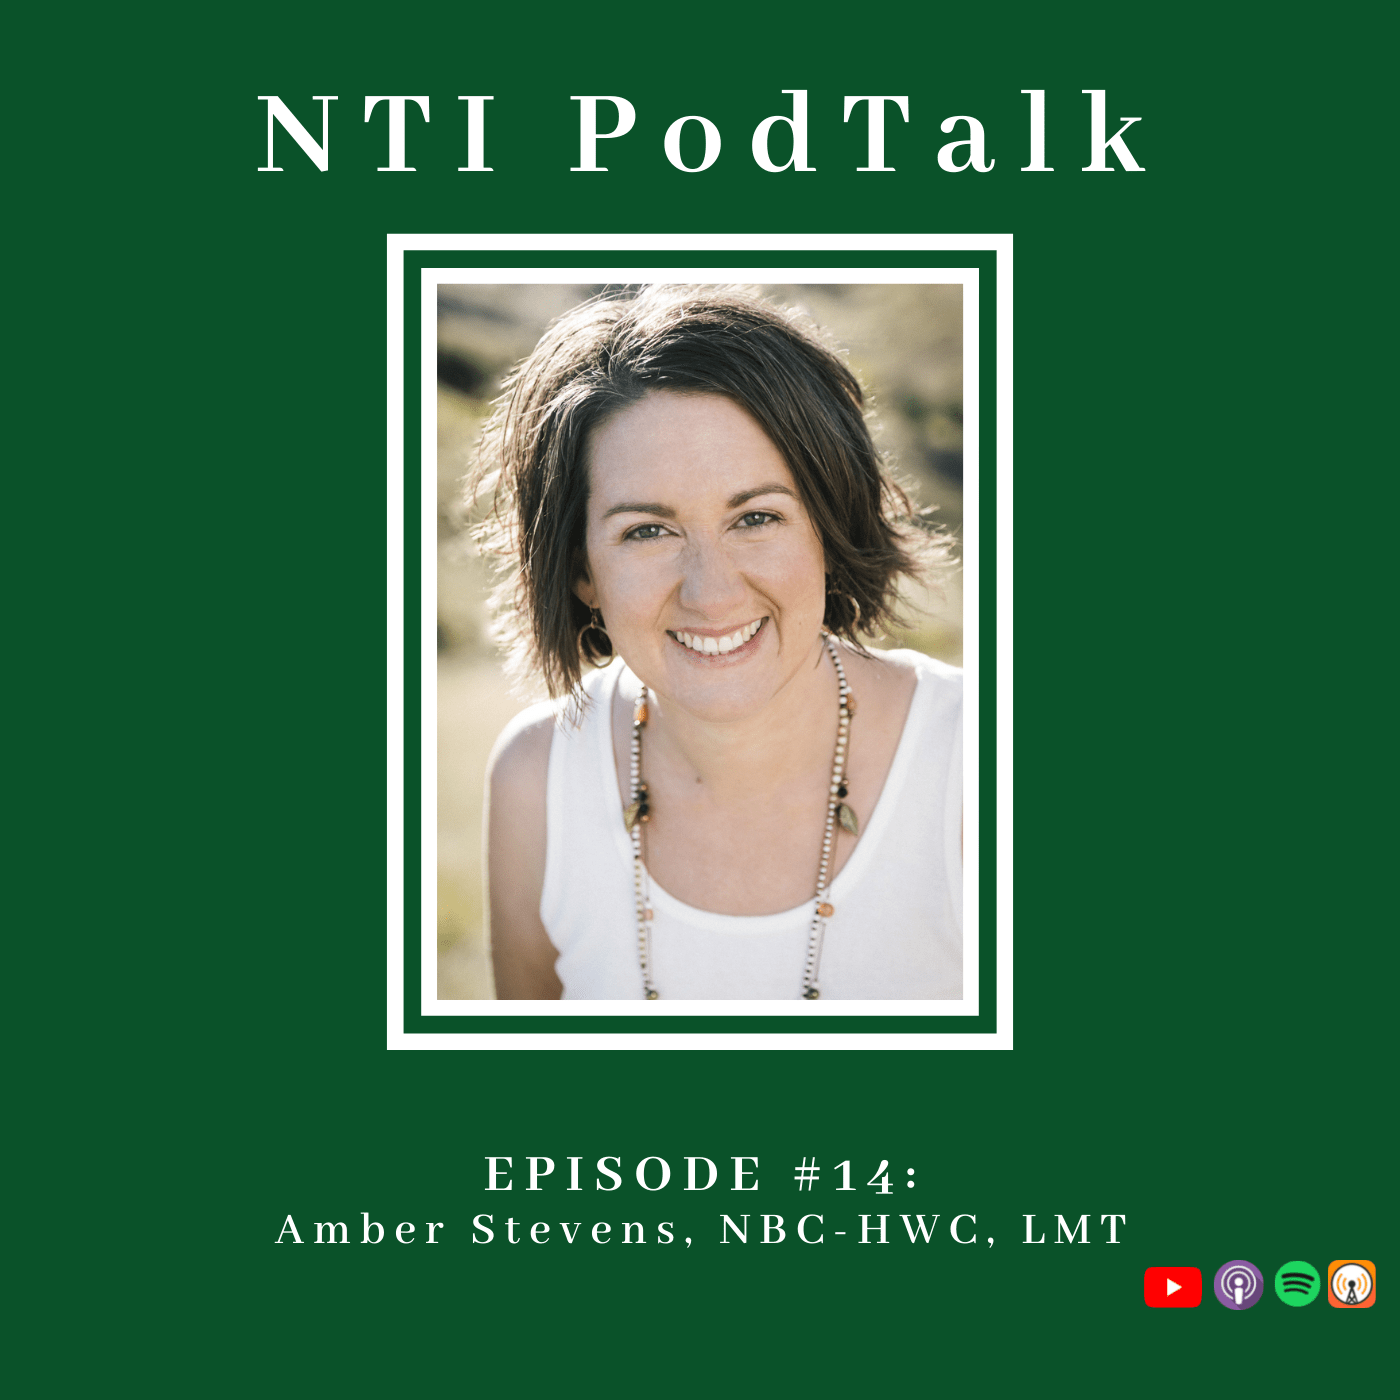 Featured image for “NTI PodTalk with Amber Stevens, Author”